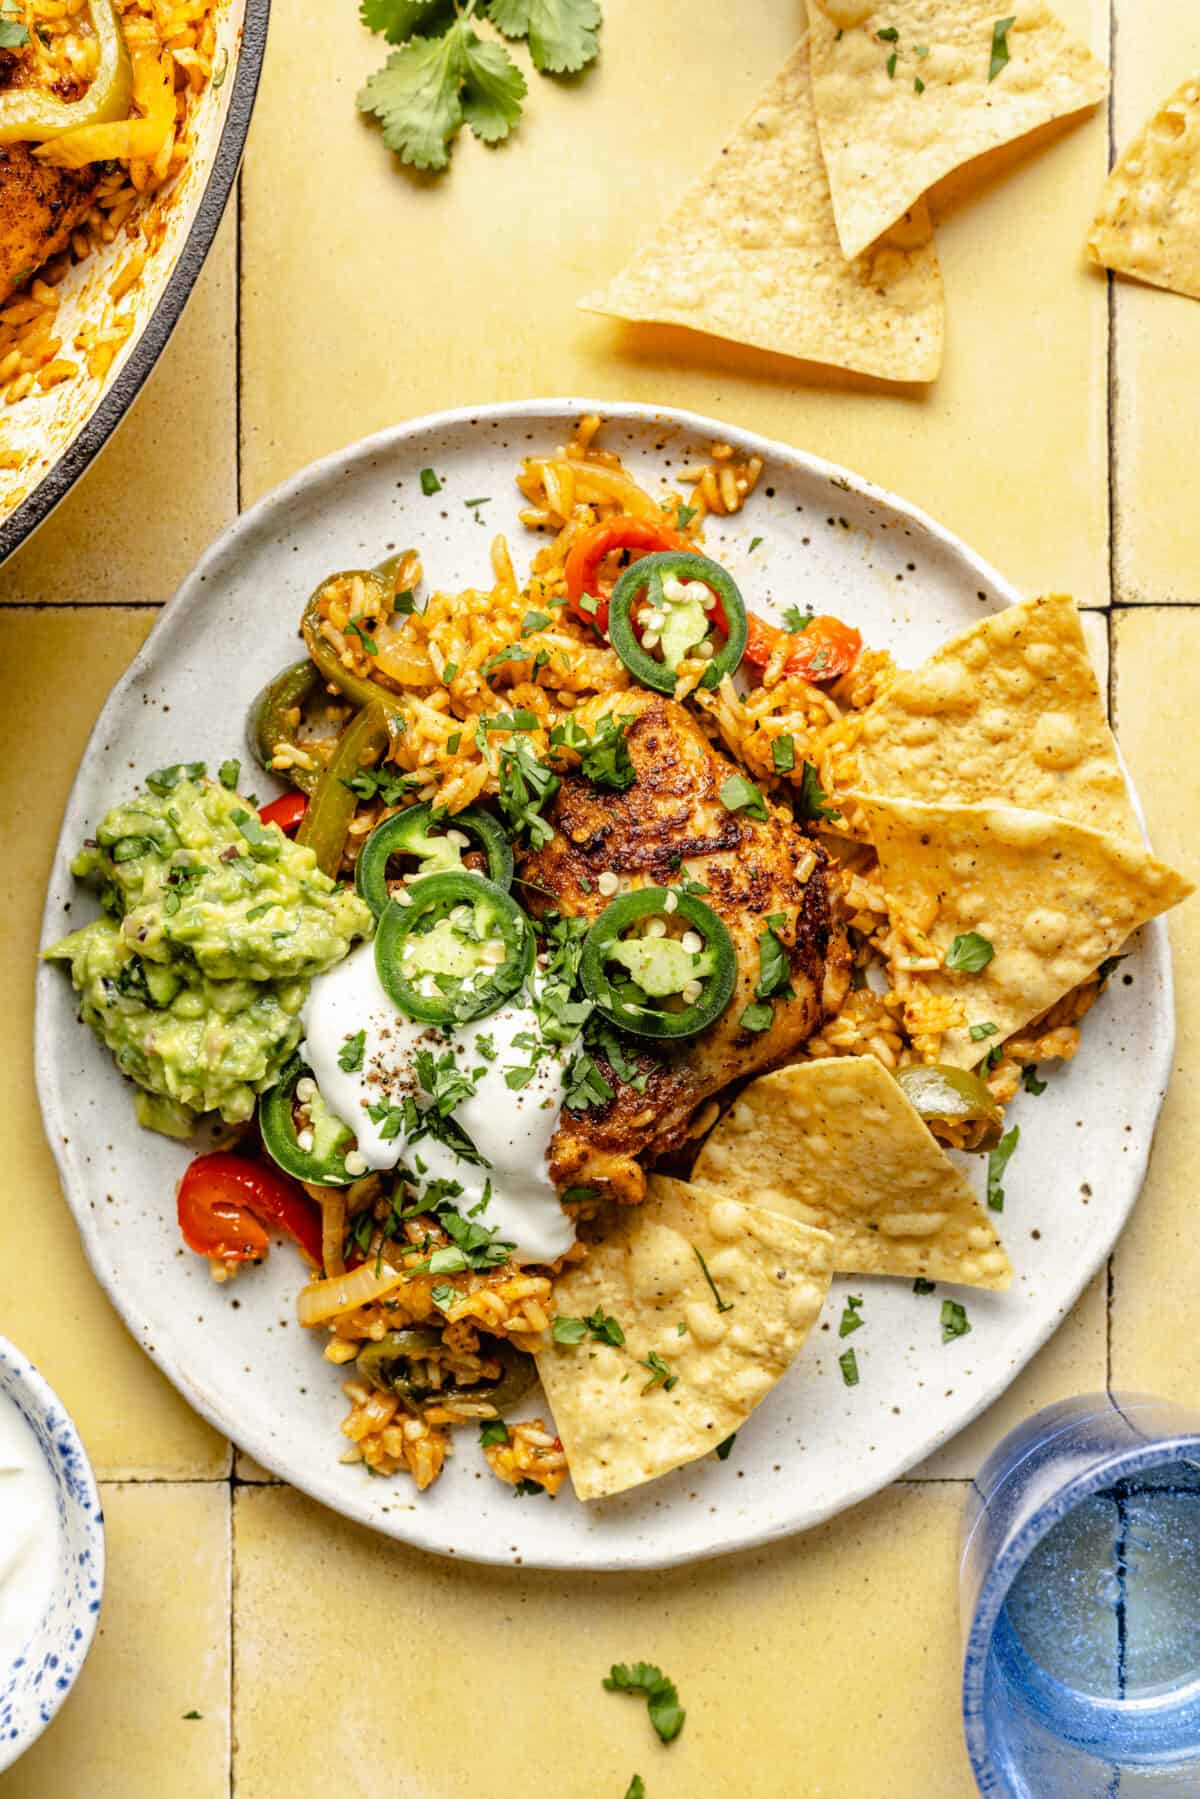 Chicken and Rice Taco Skillet plated with sour cream, guacamole, and chips.